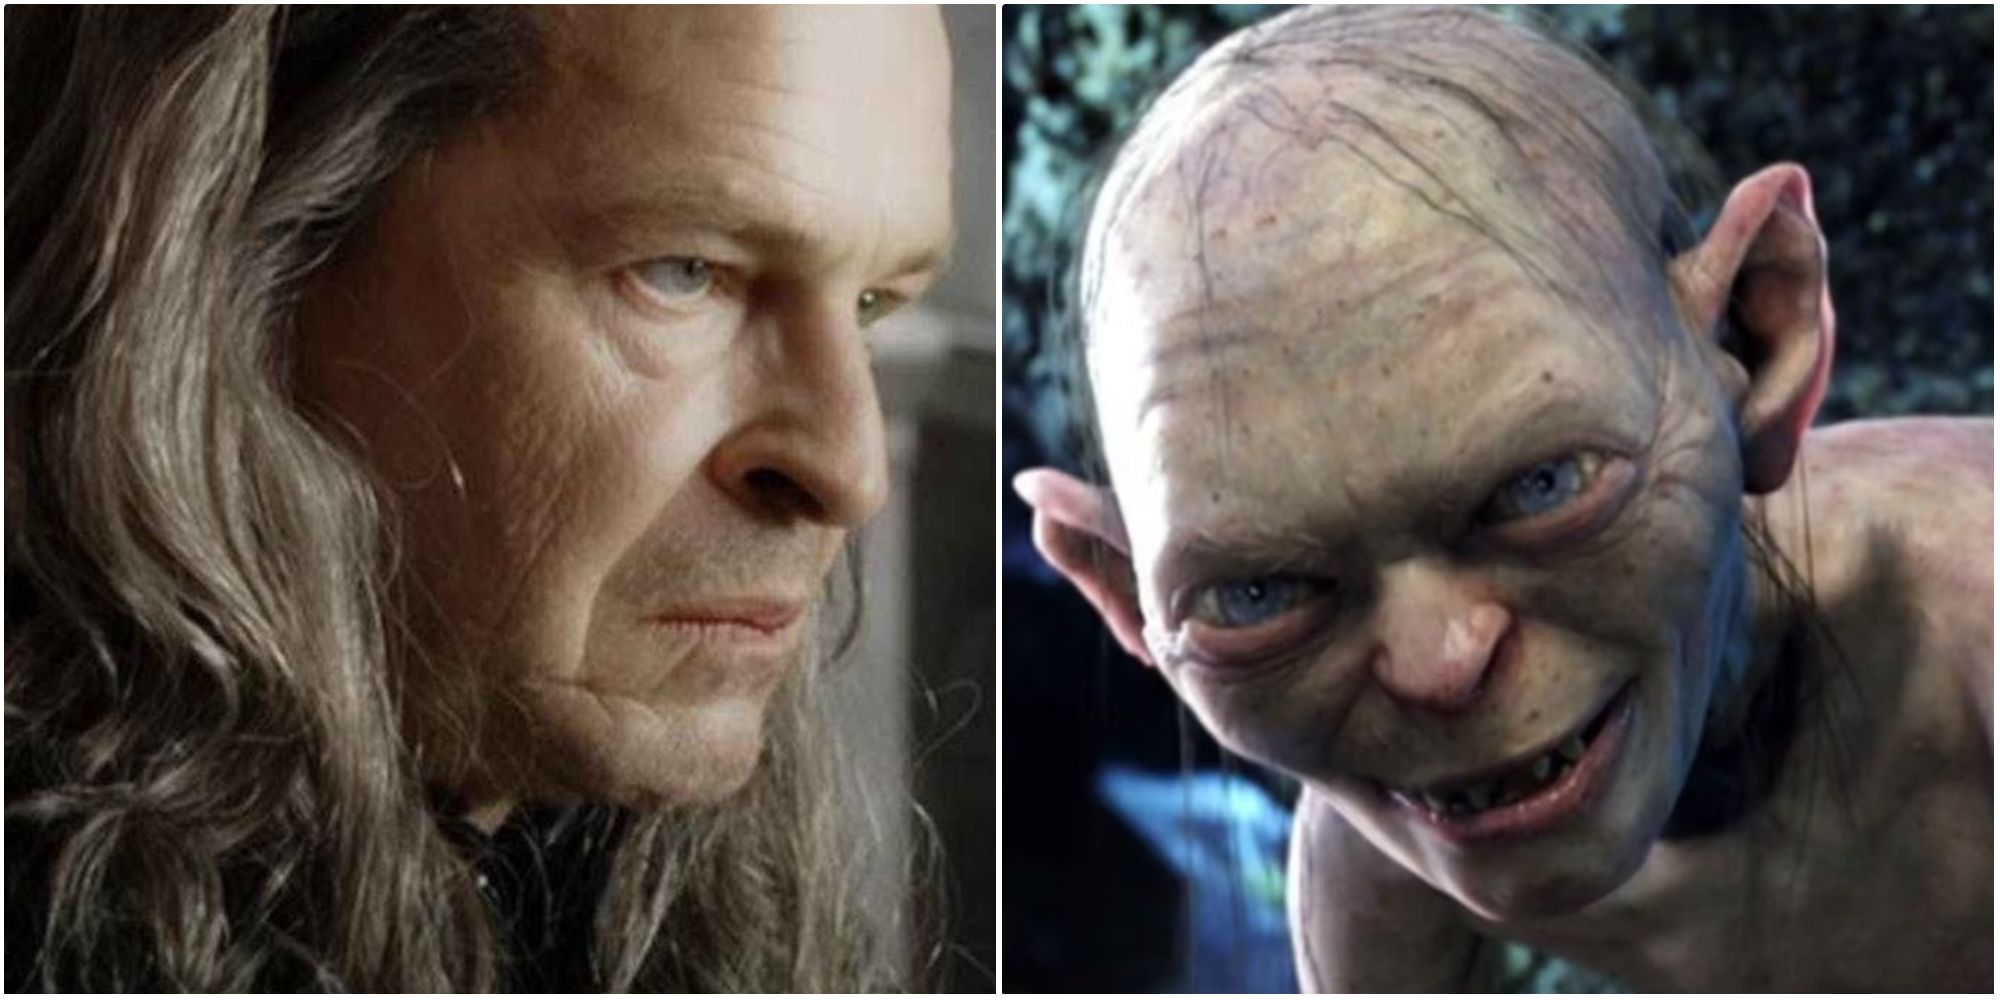 10 'Lord of the Rings' Characters Who Deserve a Solo Game More Than Gollum-gemektower.com.vn